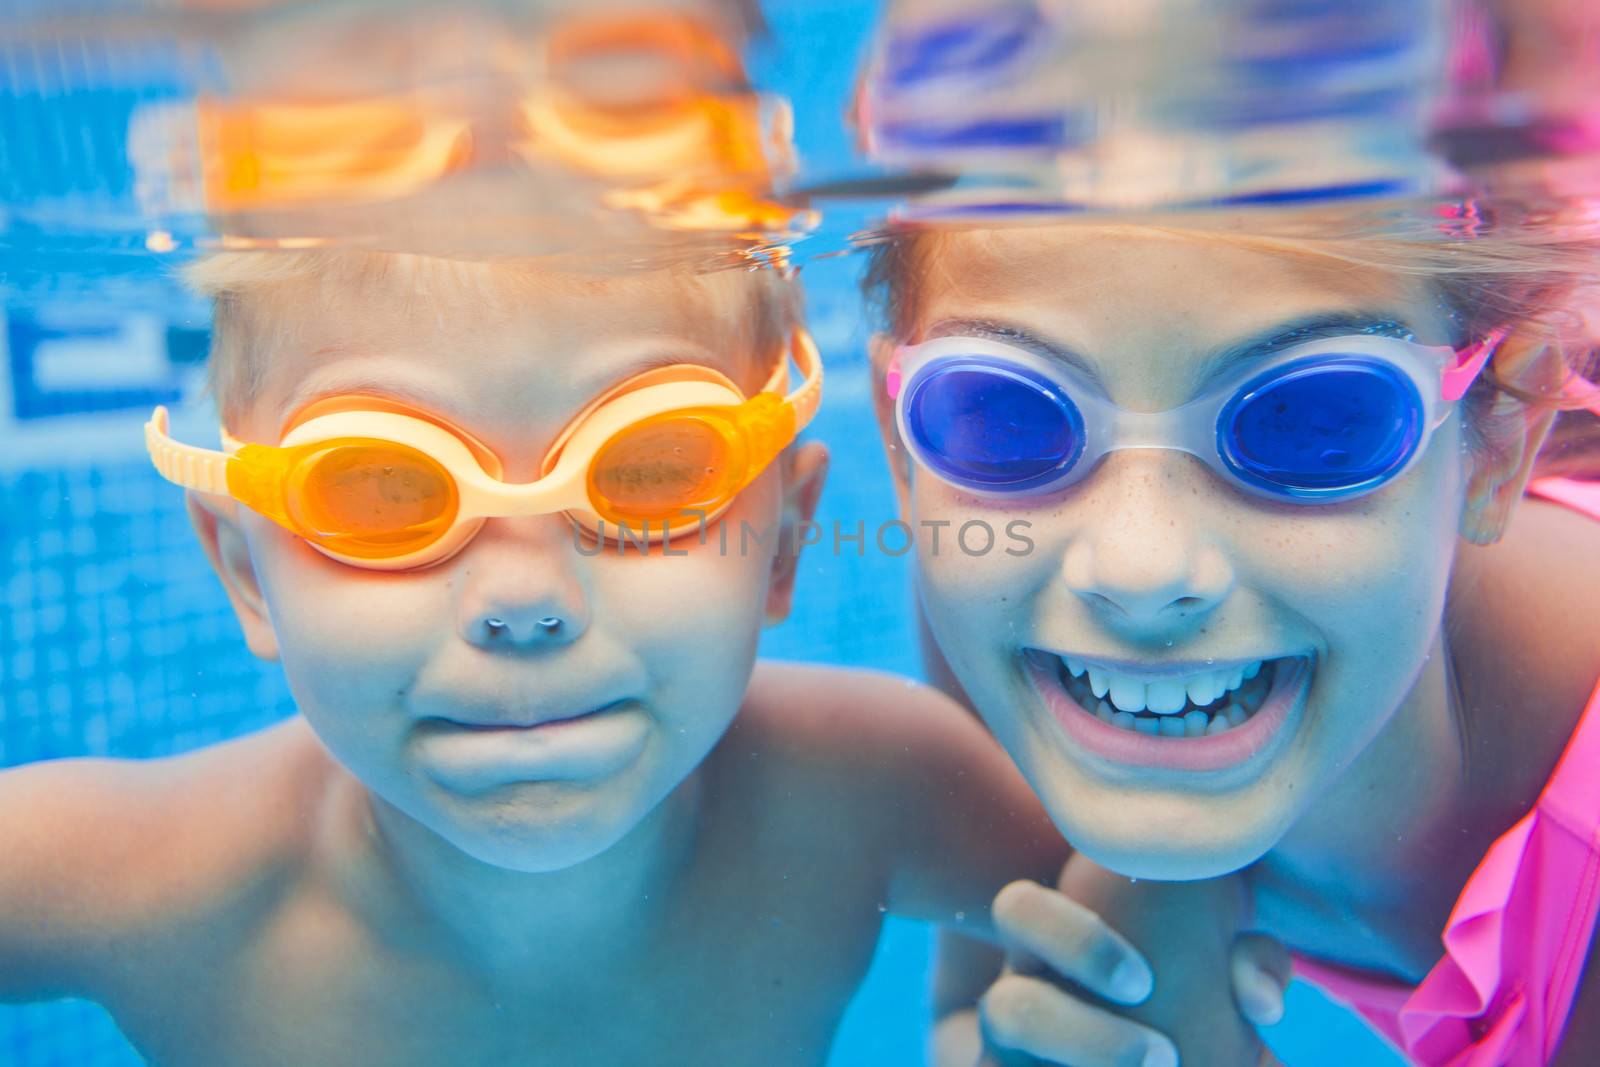 Close-up underwater portrait of the two cute smiling kids